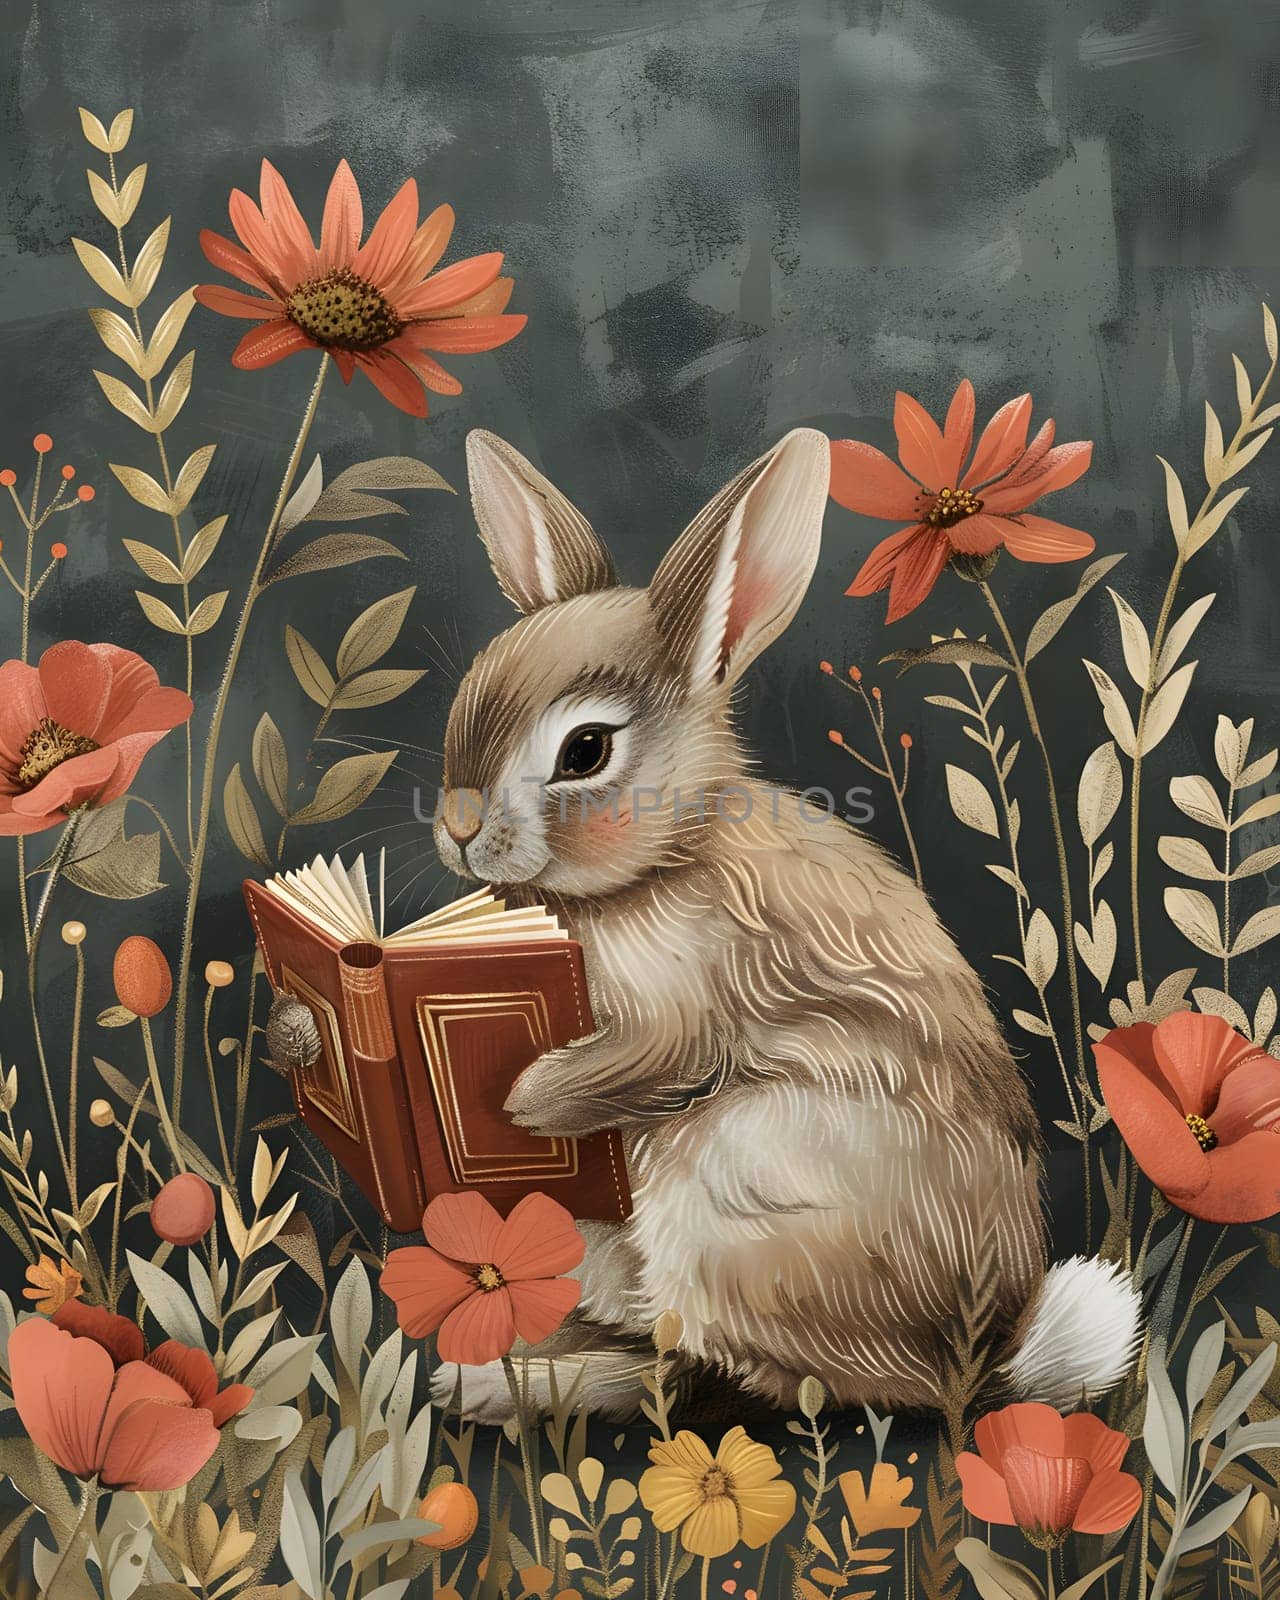 The wood rabbit is engrossed in a botany book while surrounded by a sea of colorful flowers in nature. A serene painting featuring the hare and fawn